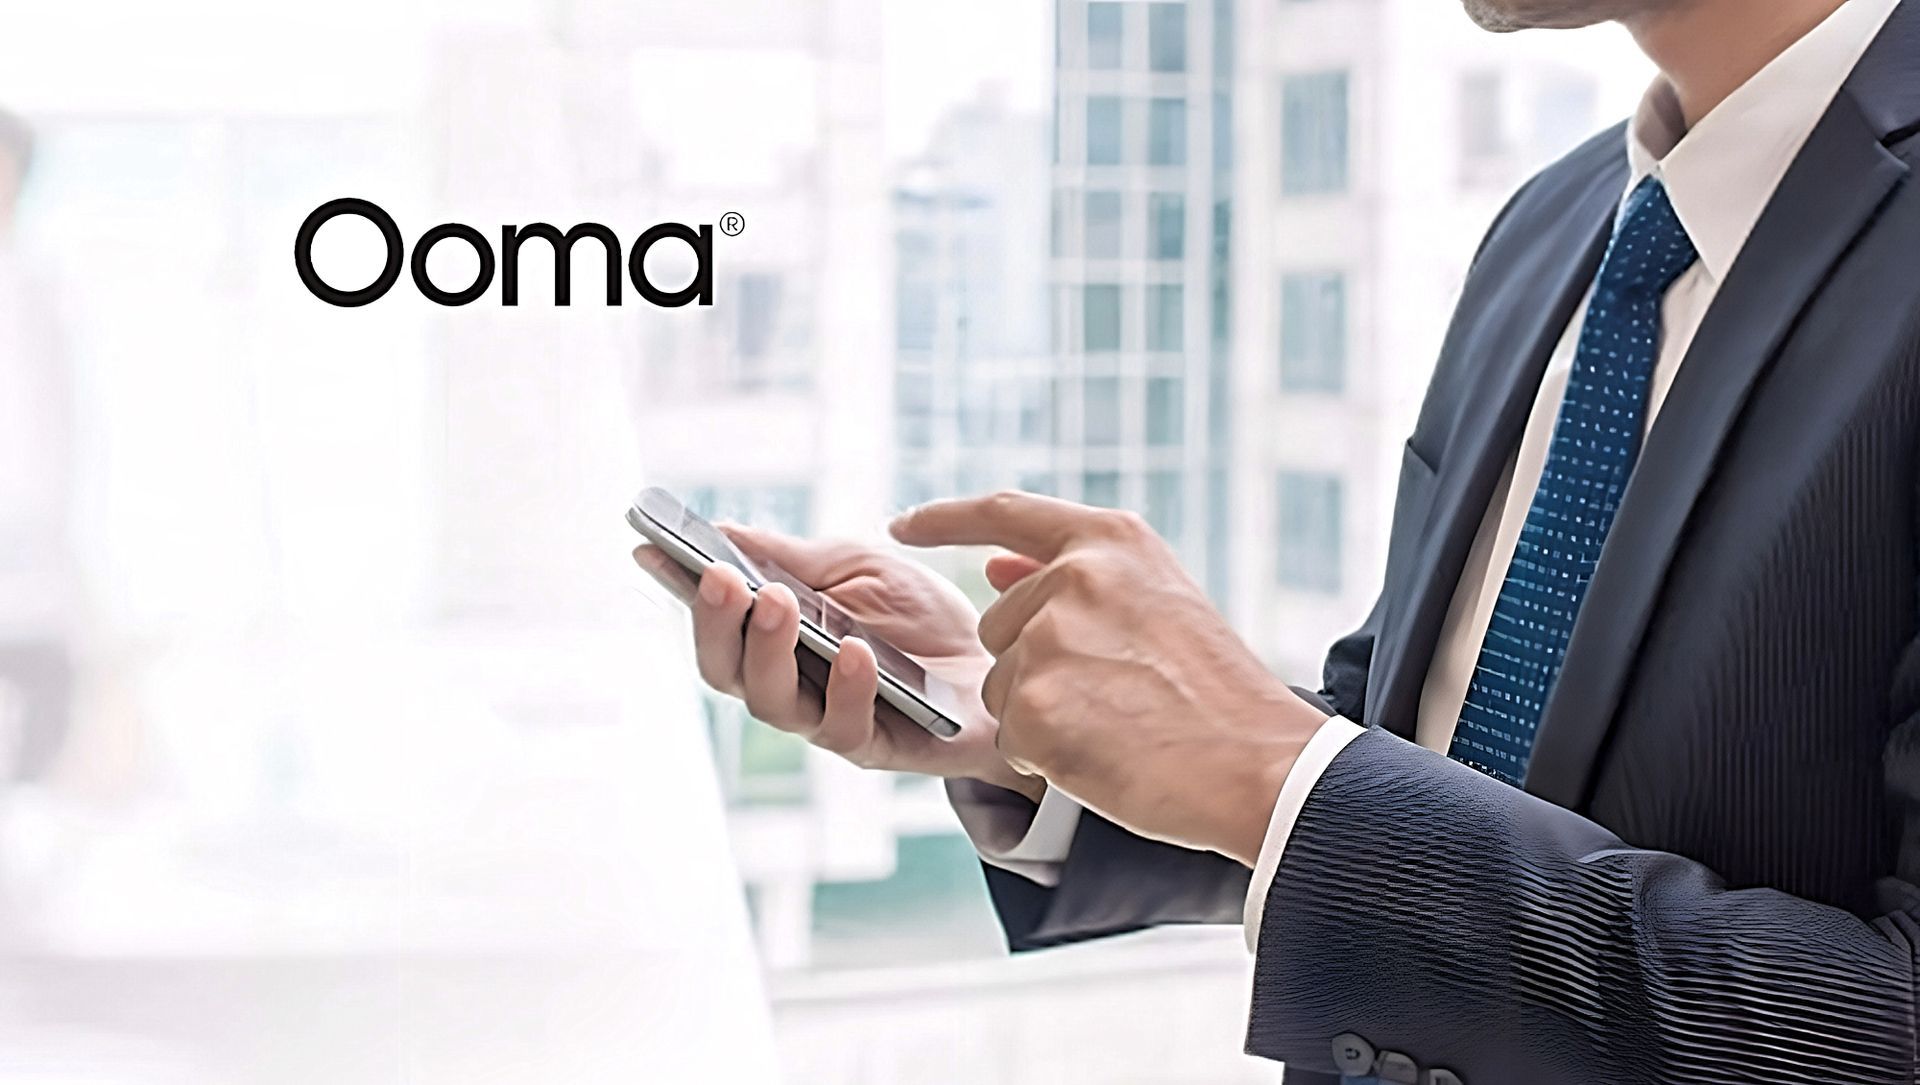 ooma connect image